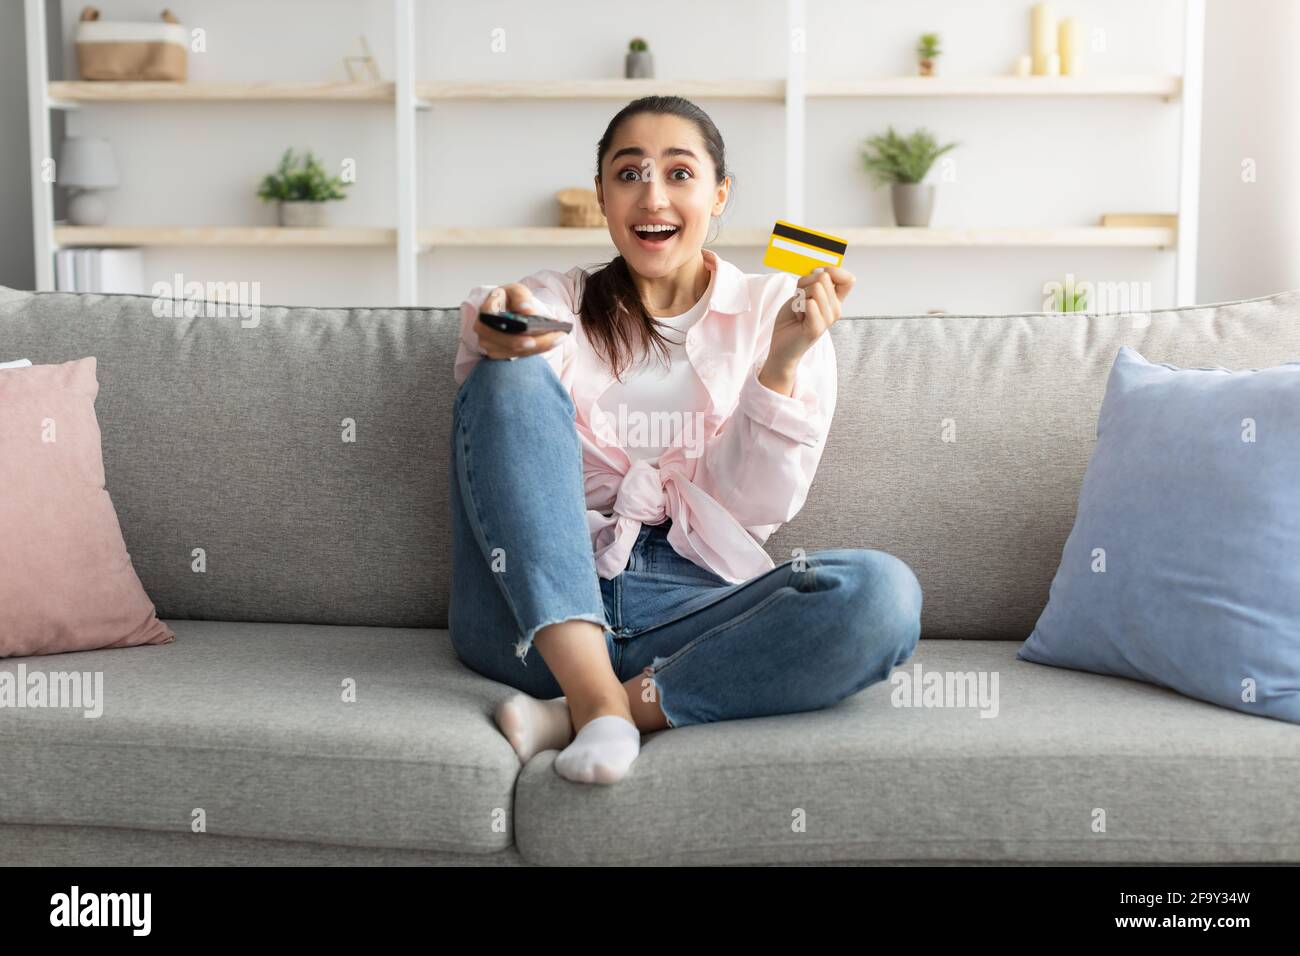 Excited woman holding remote control and debit credit card Stock Photo